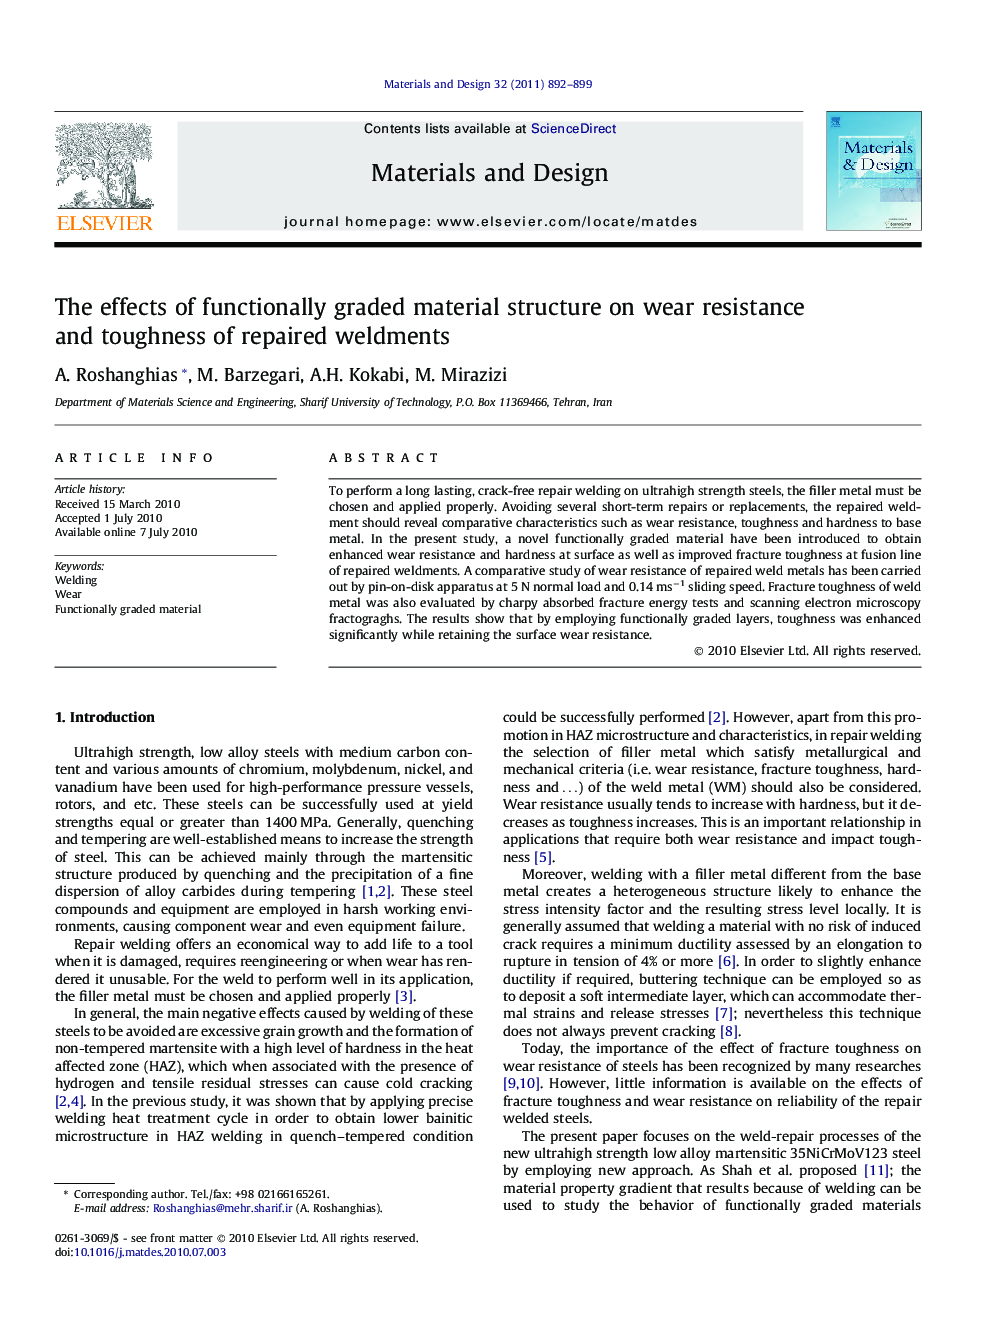 The effects of functionally graded material structure on wear resistance and toughness of repaired weldments